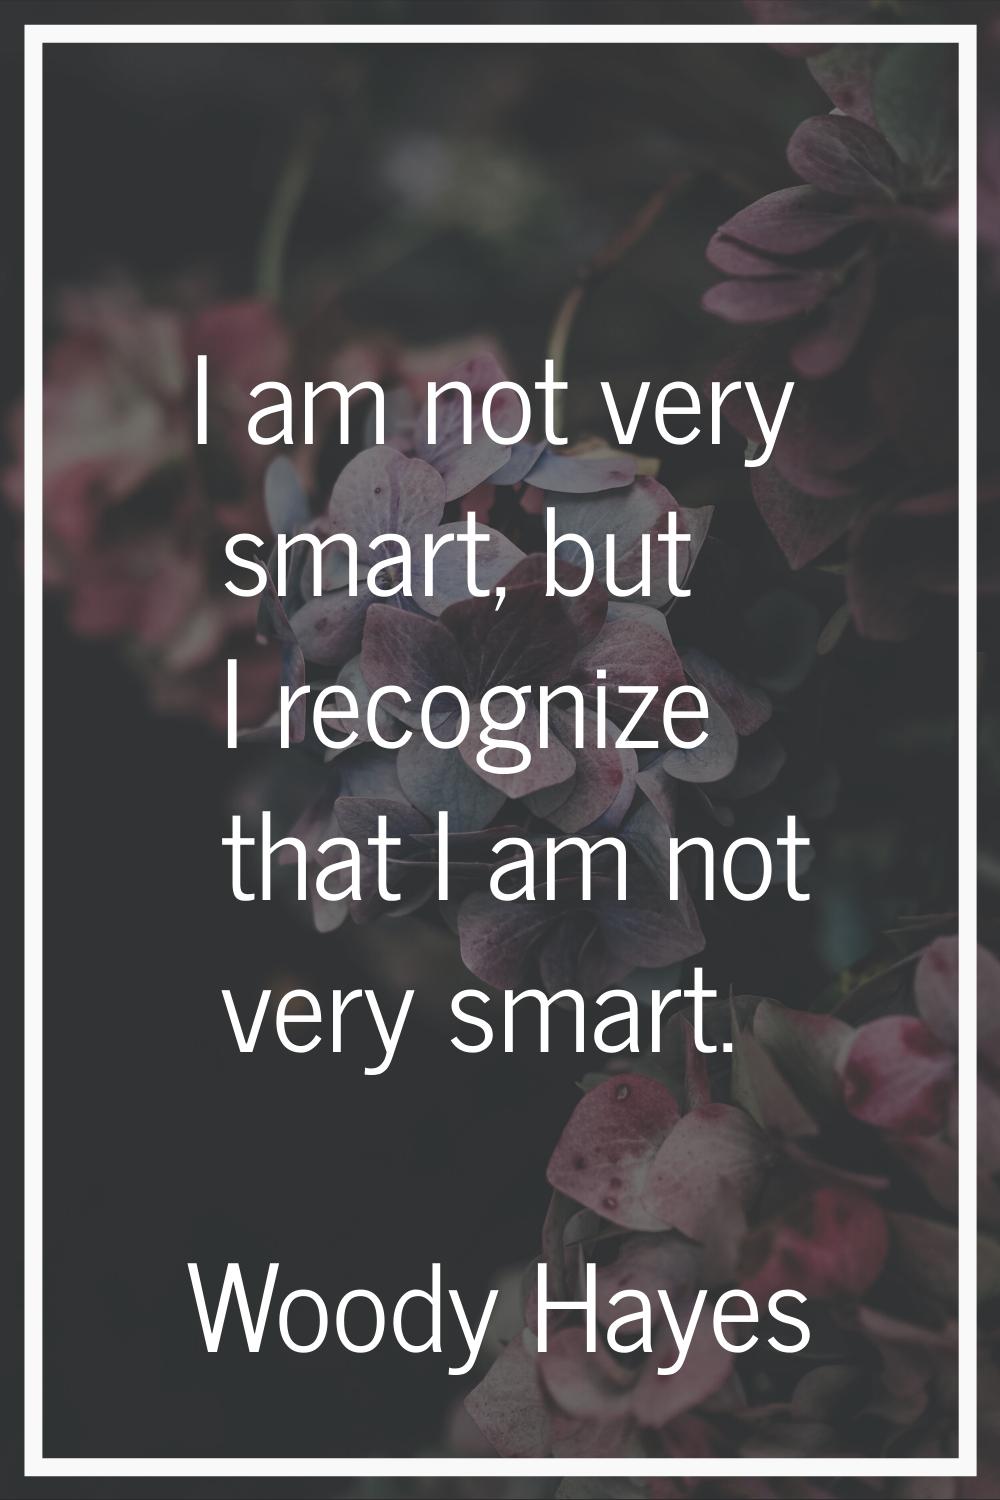 I am not very smart, but I recognize that I am not very smart.